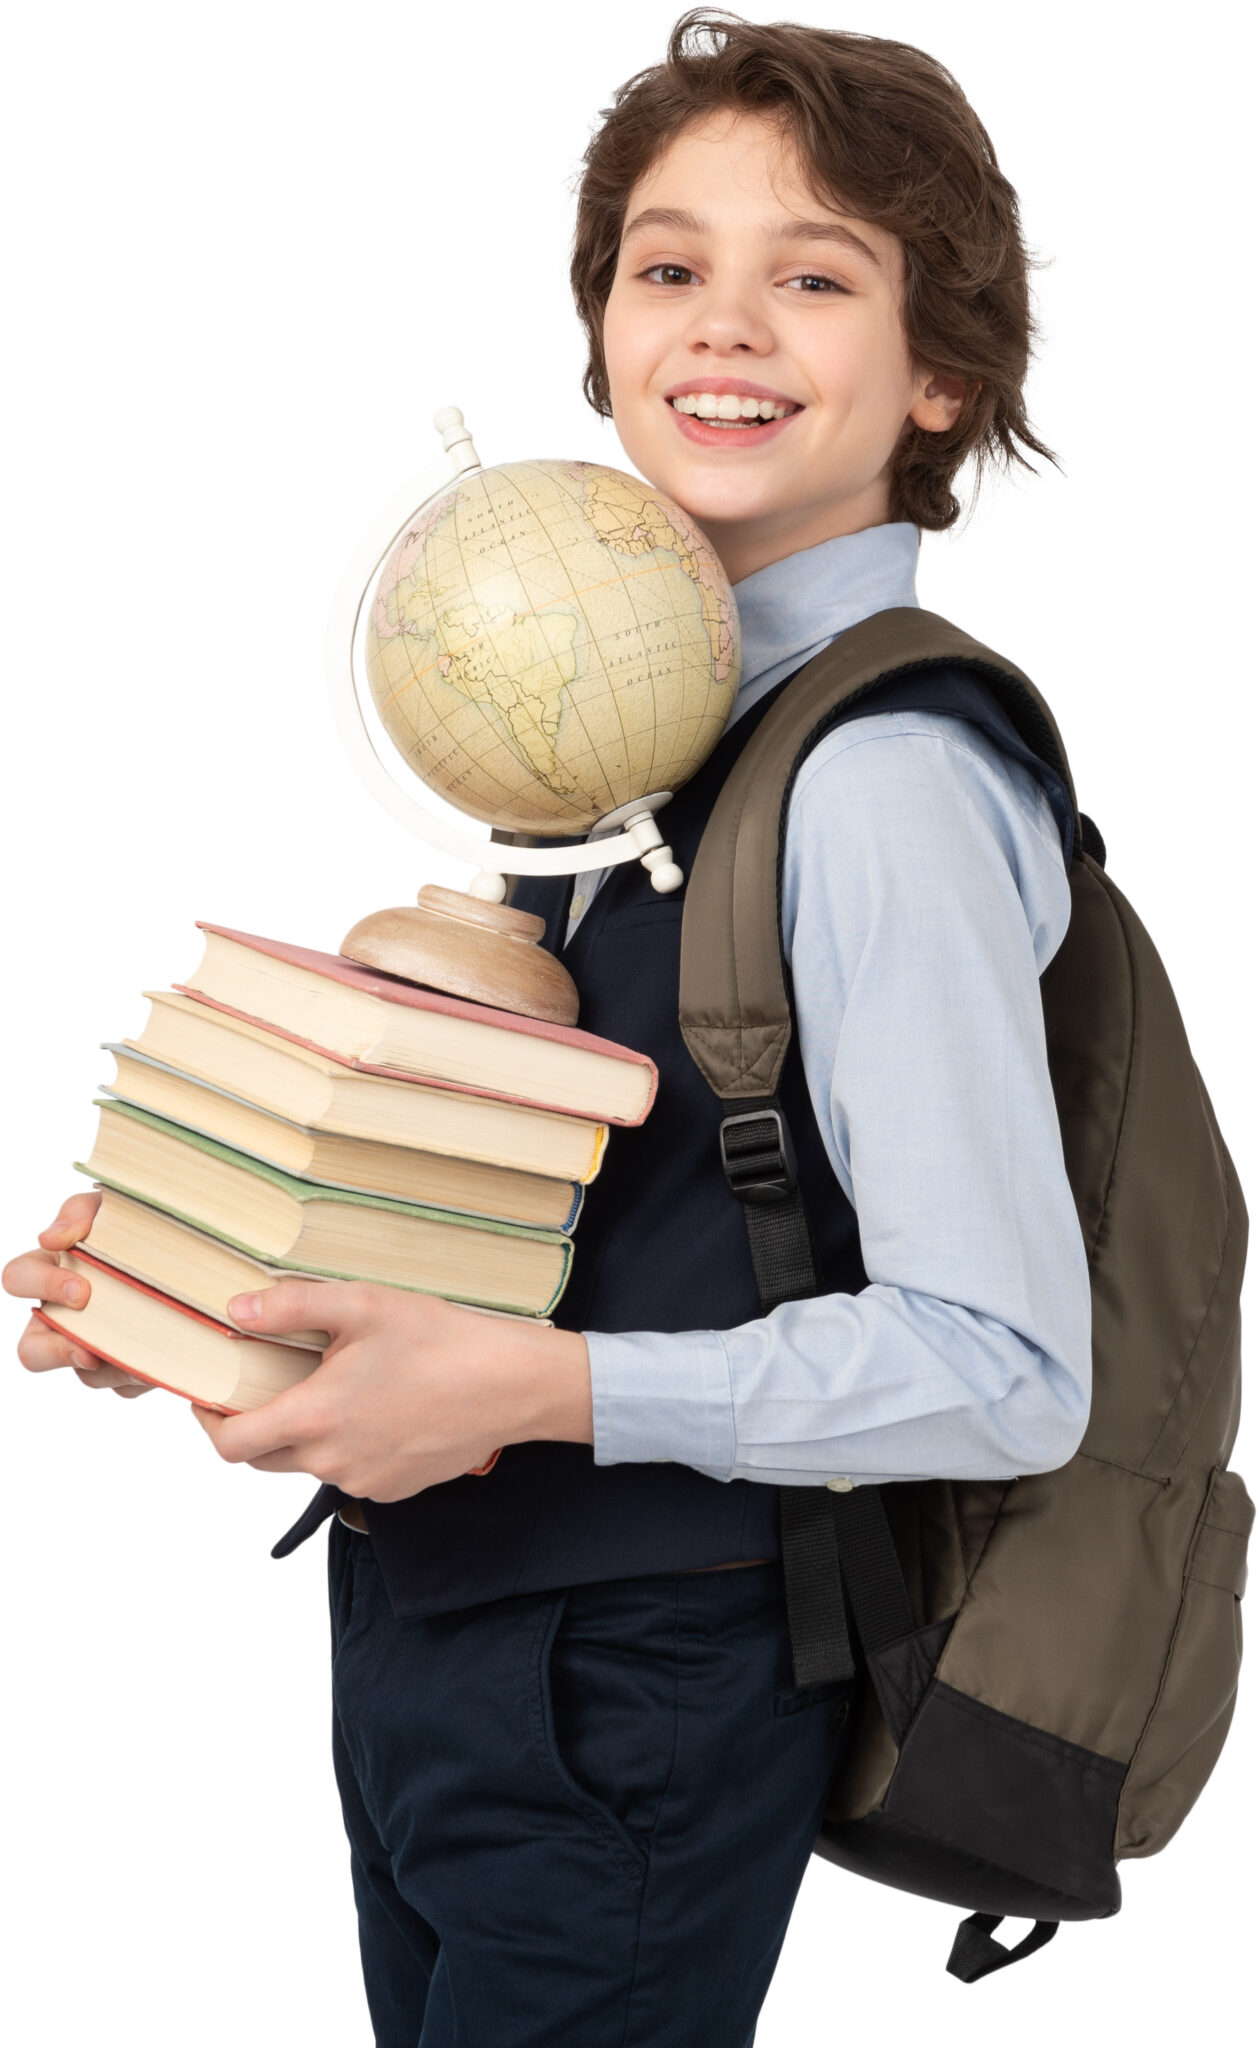 a young boy wearing a backpack holding books and a globe